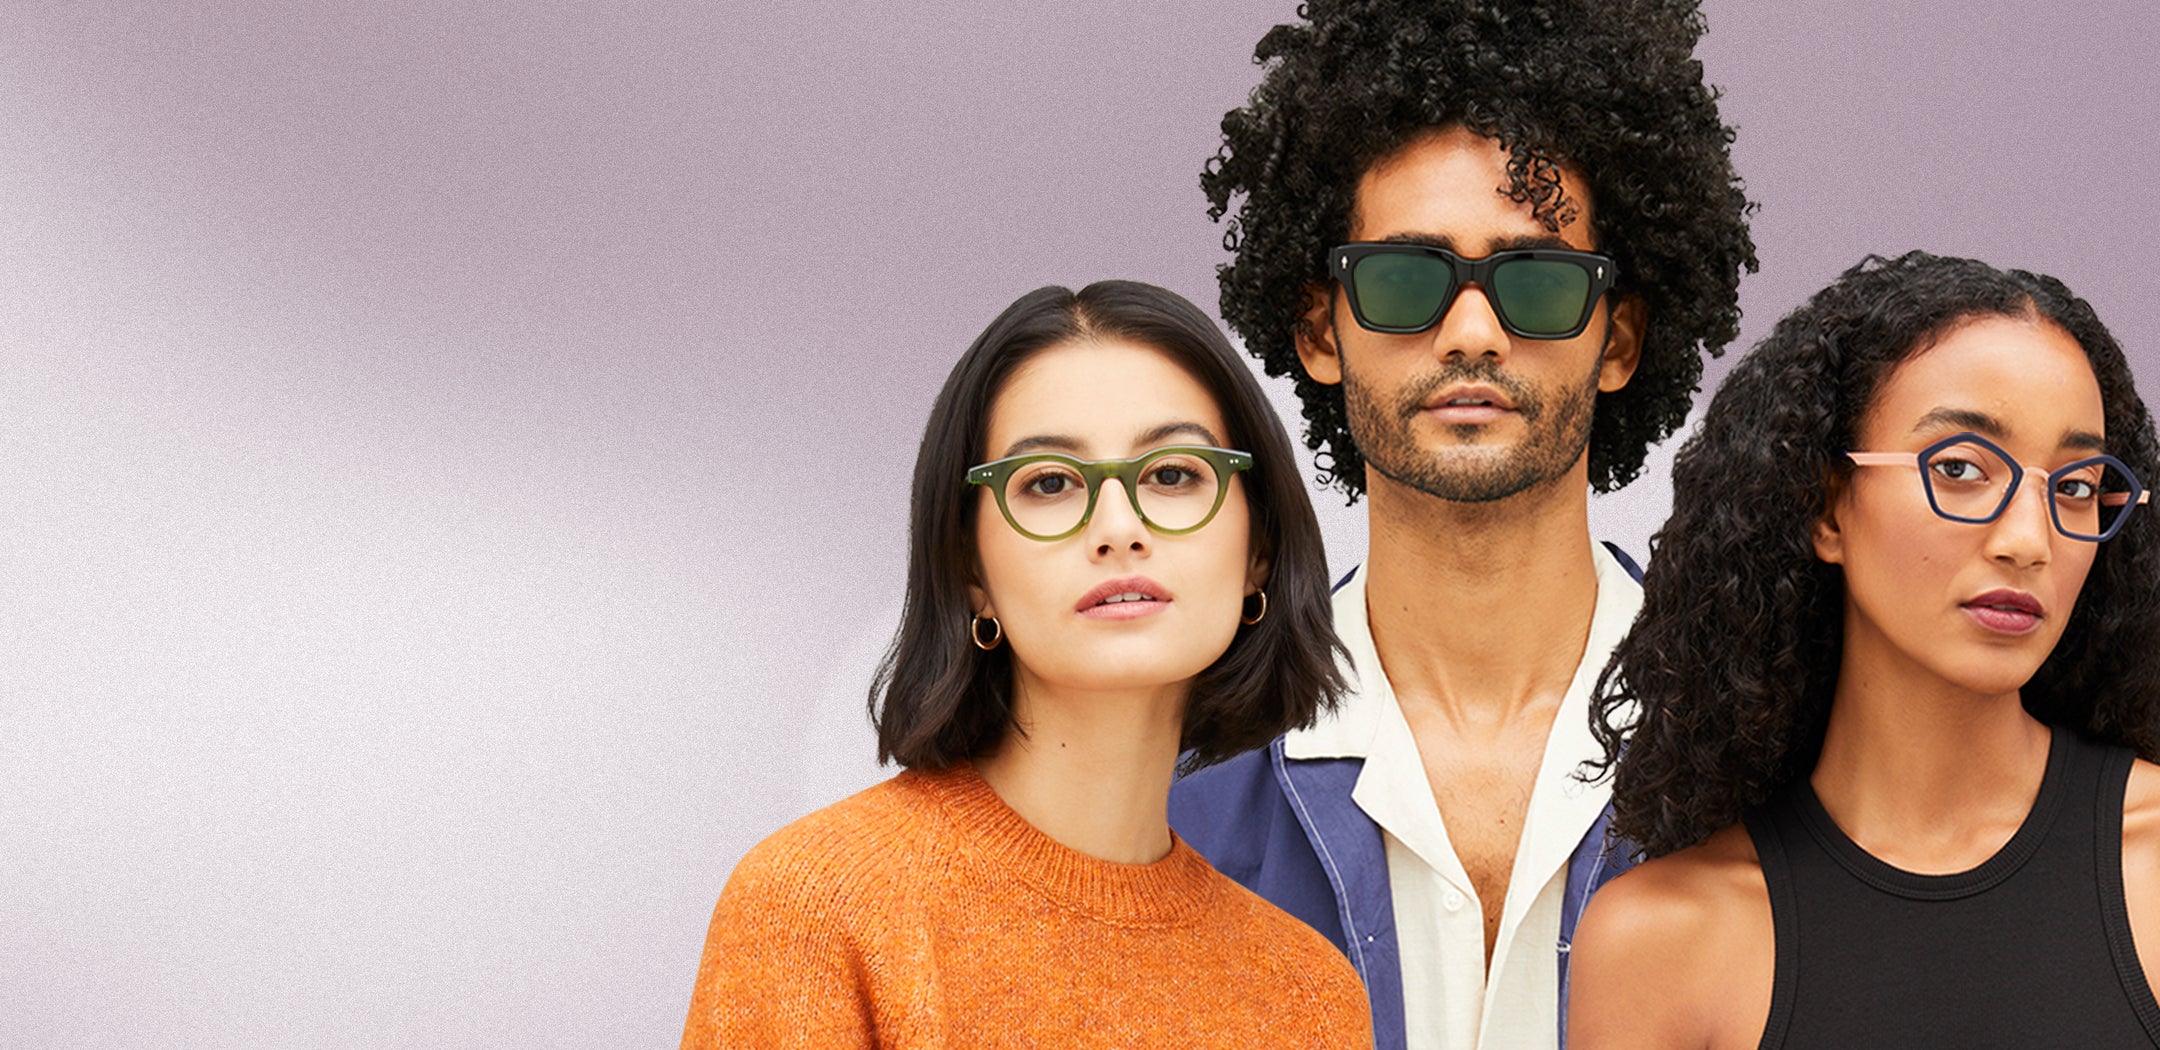 Two female models wearing eyeglasses and one male model wearing sunglasses